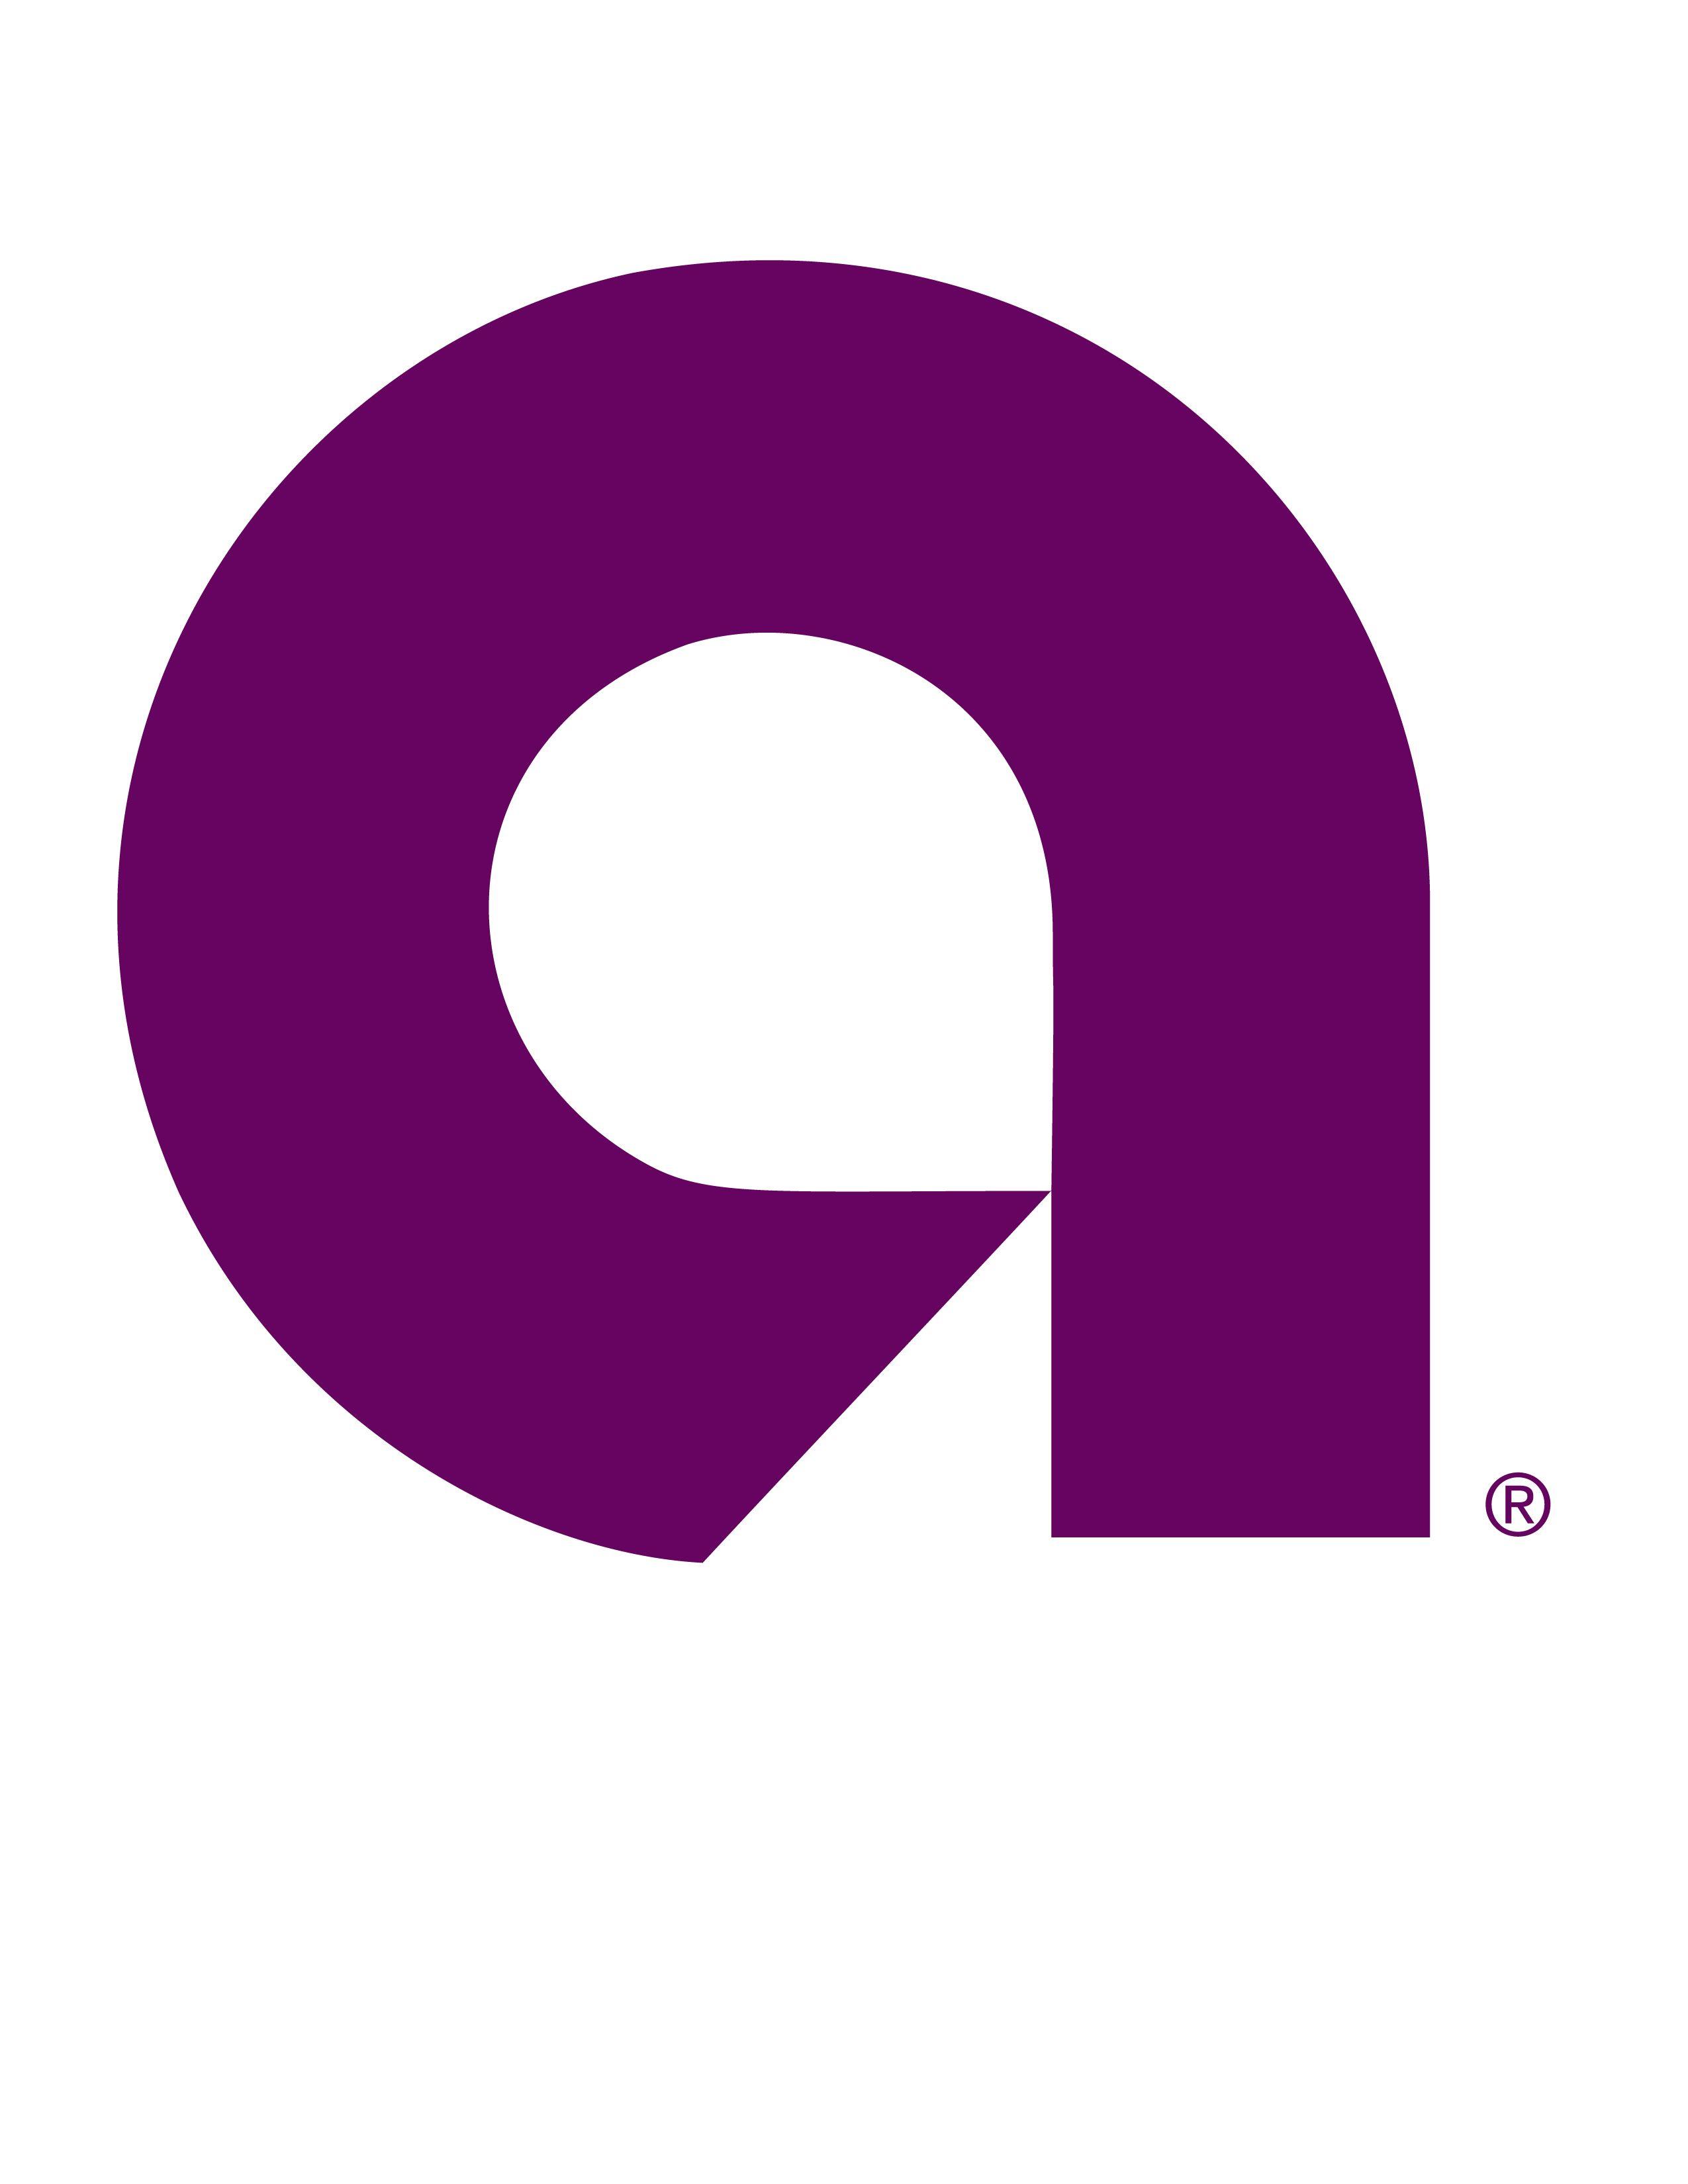 Ally Logo - Images | Ally Financial